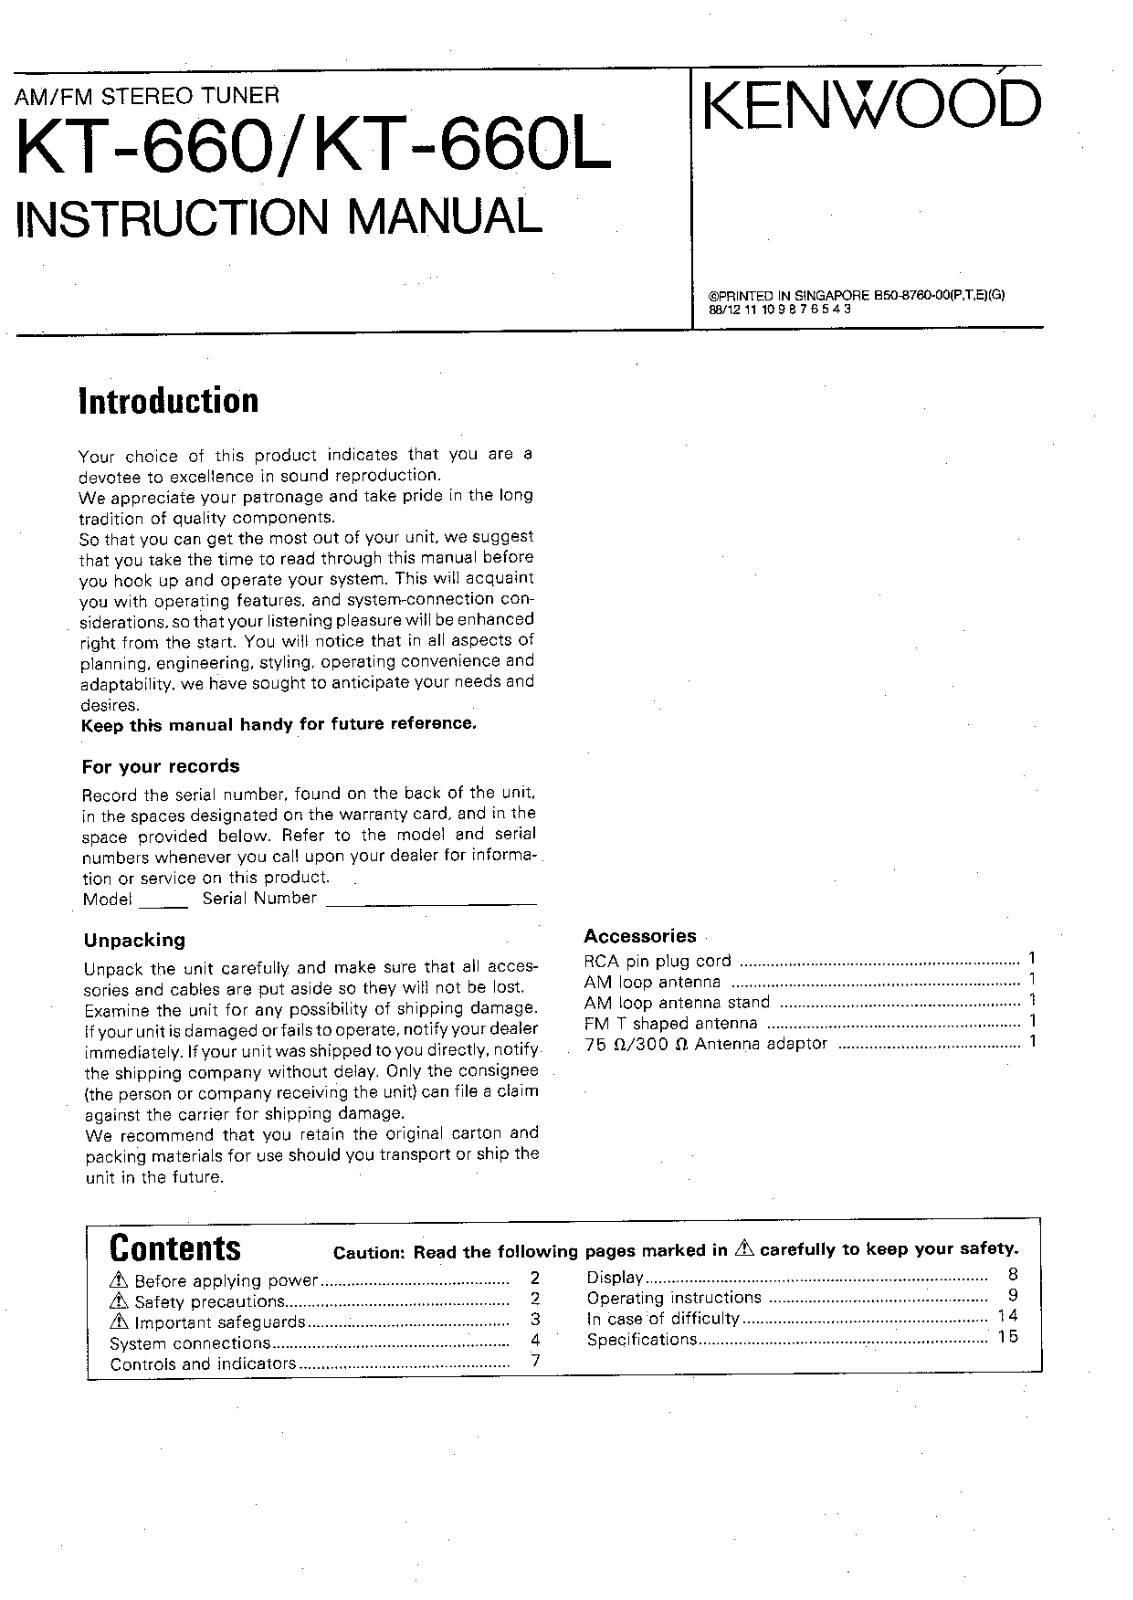 Kenwood KT-660-L Owners manual